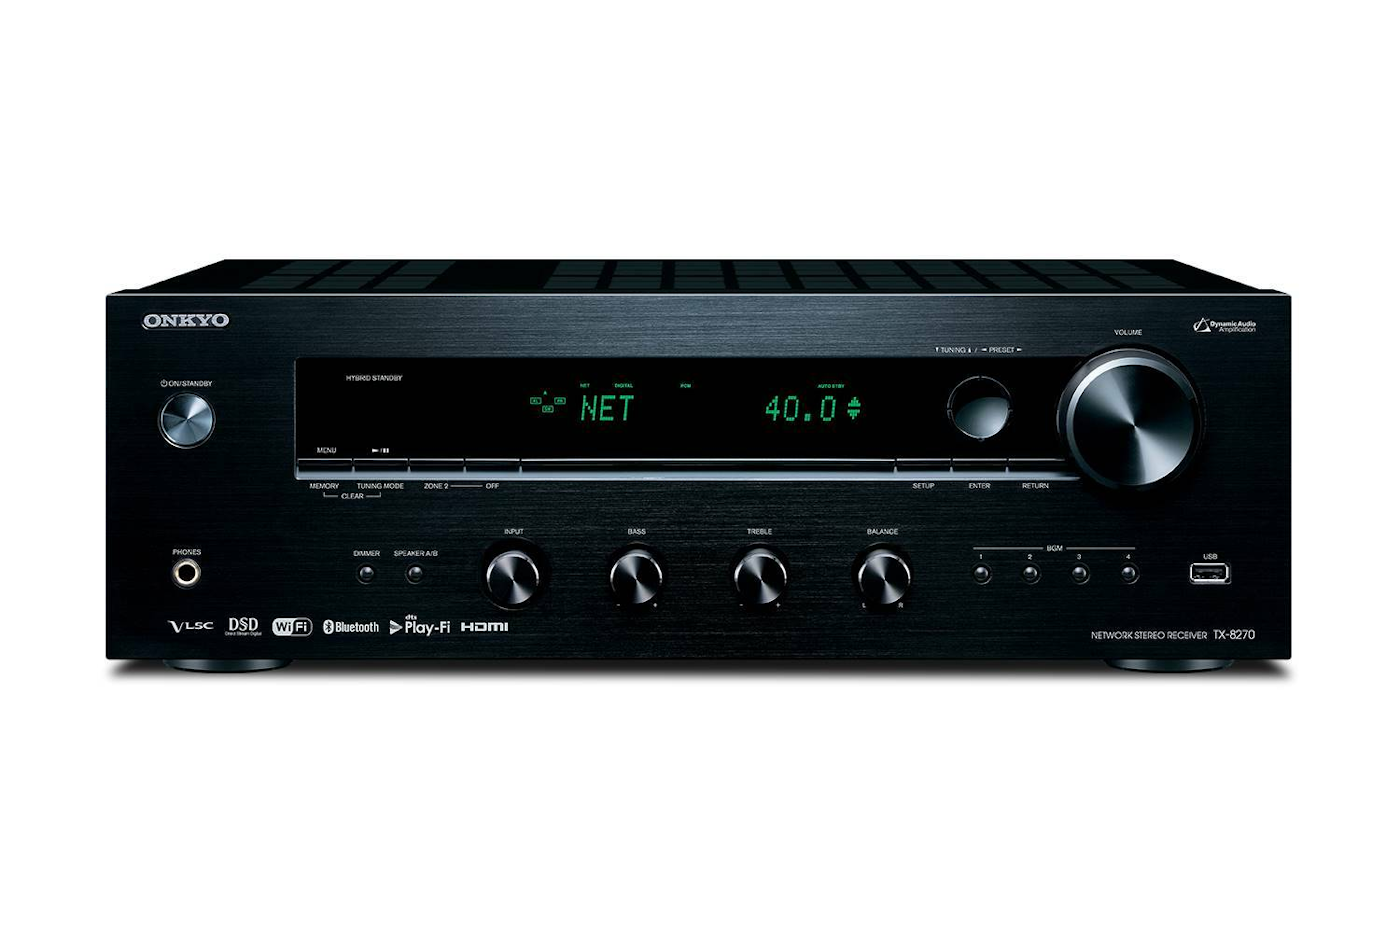 Onkyo TX-8270 Stereo Receiver Front View on White Background